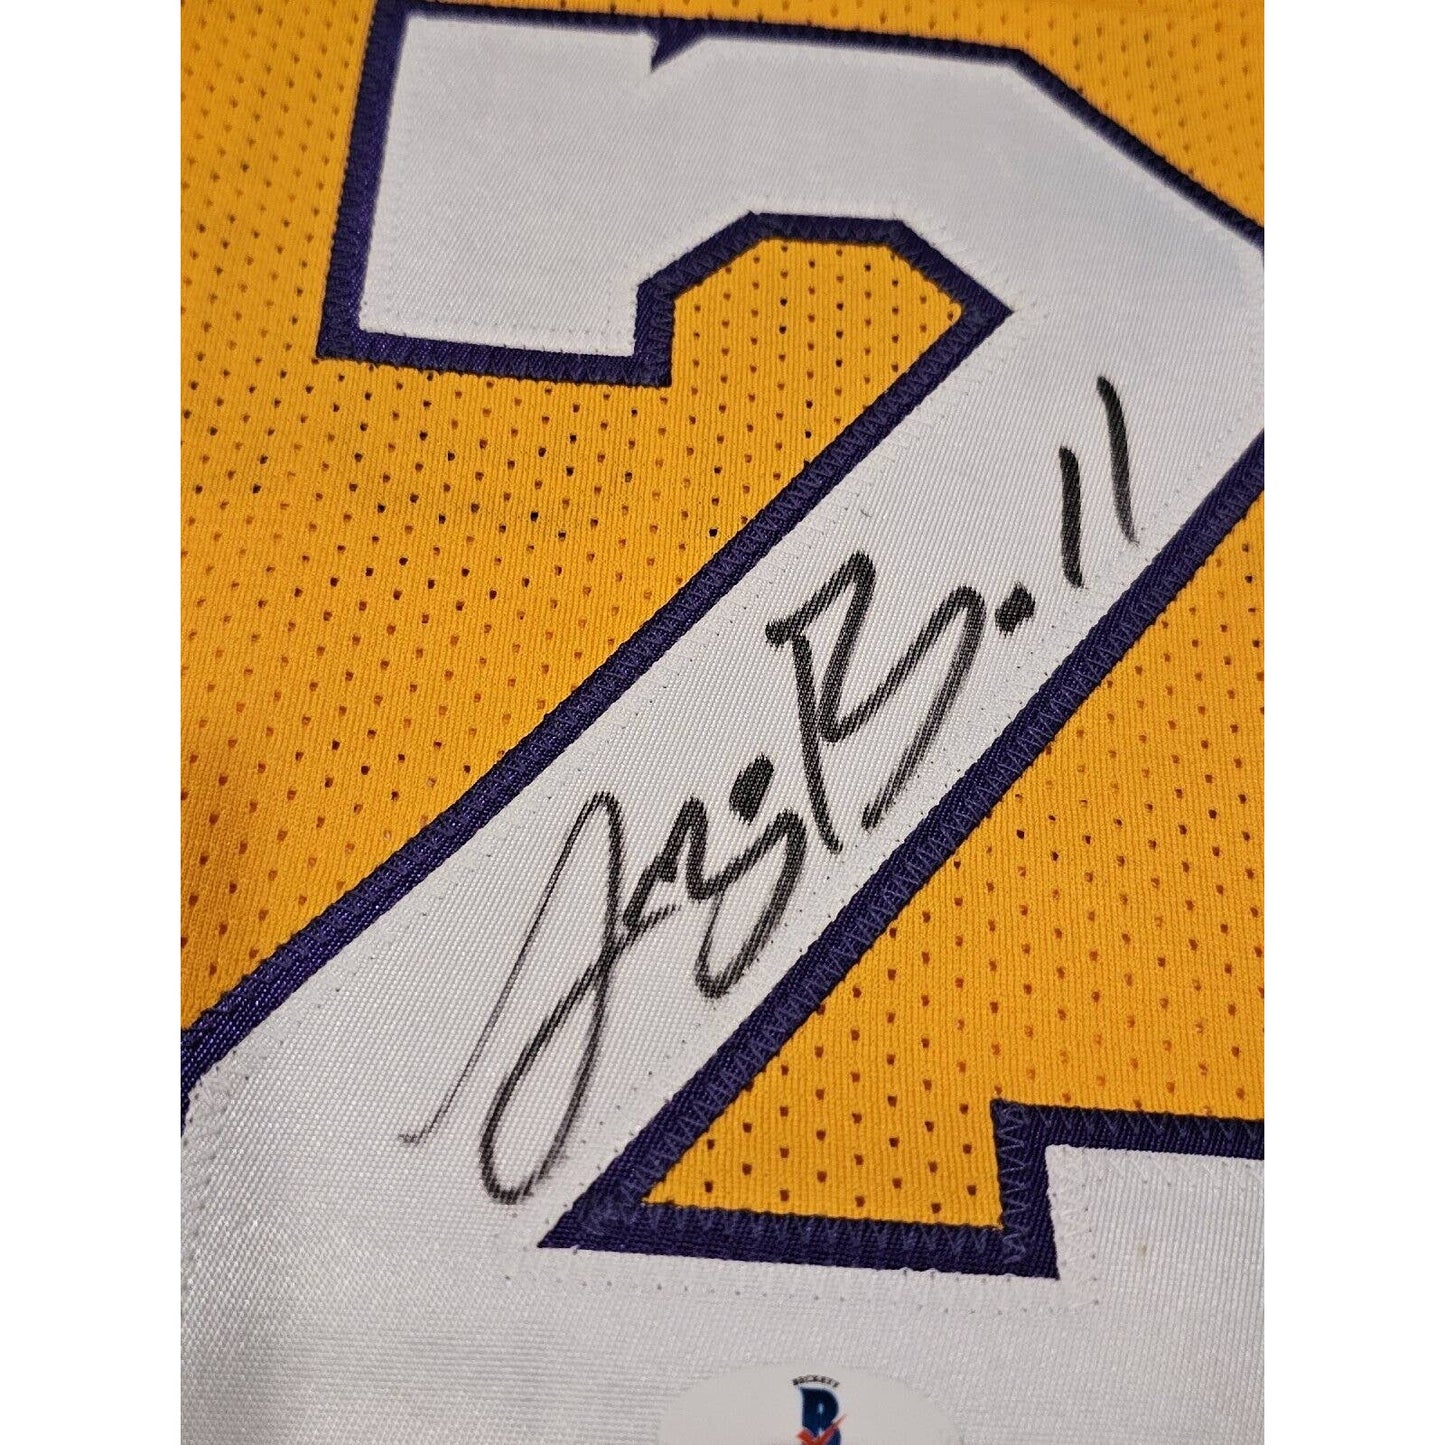 Lonzo Ball Autographed/Signed Jersey Beckett Los Angeles Lakers LA